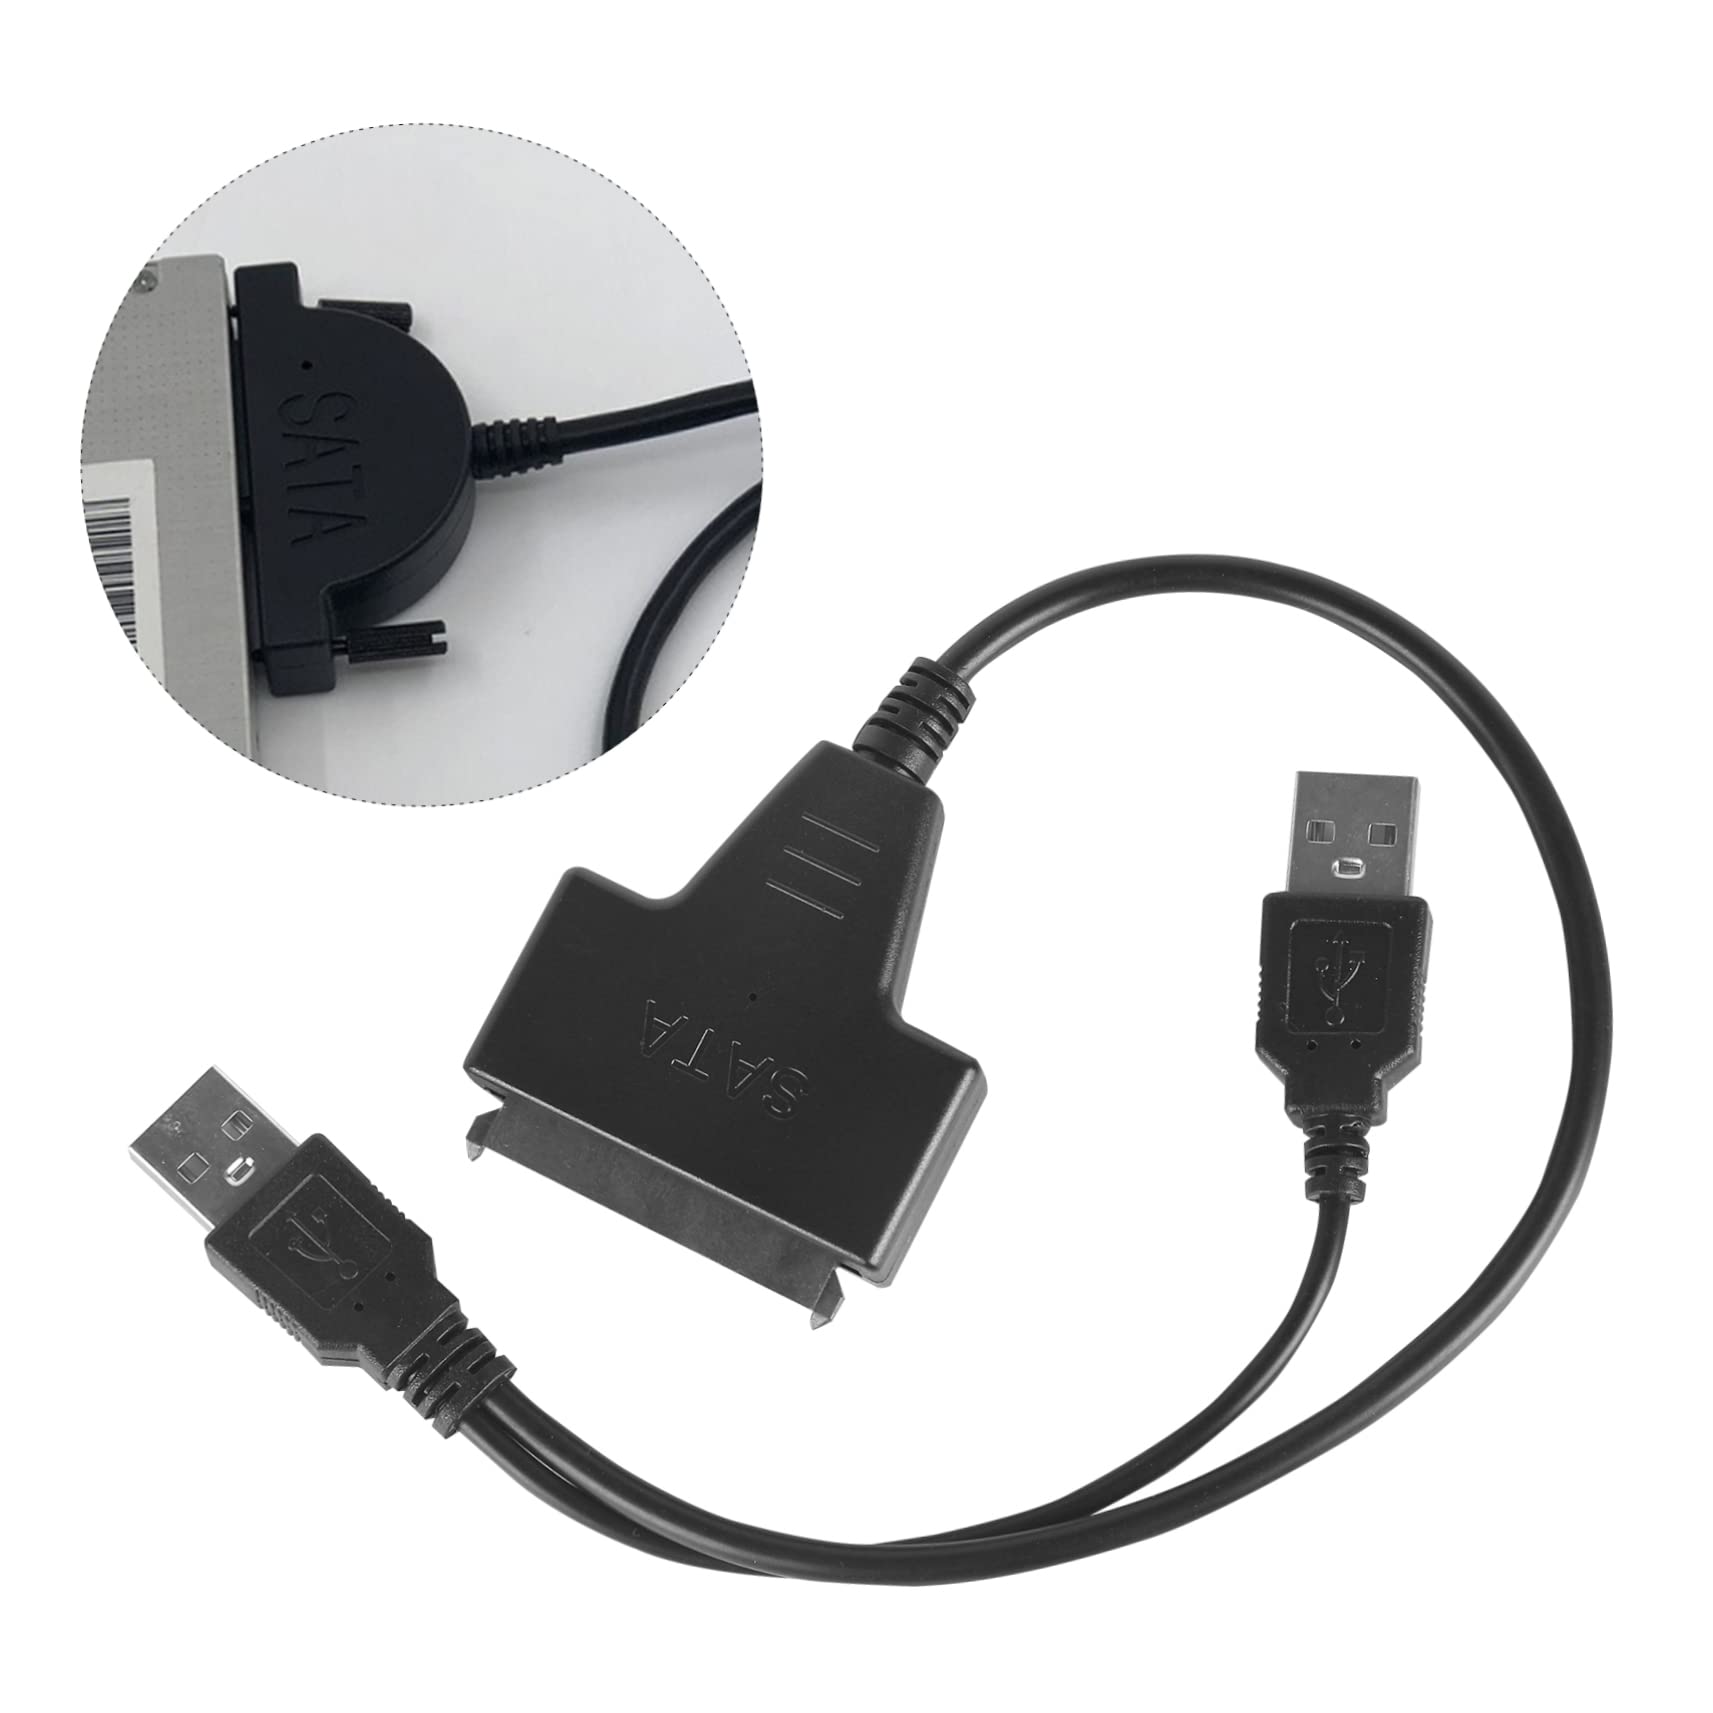 KOMBIUDA Hard Drive Cable USB to Connector Adapter USB Cables Laptop Hard Drive USB connectors USB to Wire USB to 3. 5 USB to Data Line to USB Cable USB a Cable Hard Disk Converter Copper